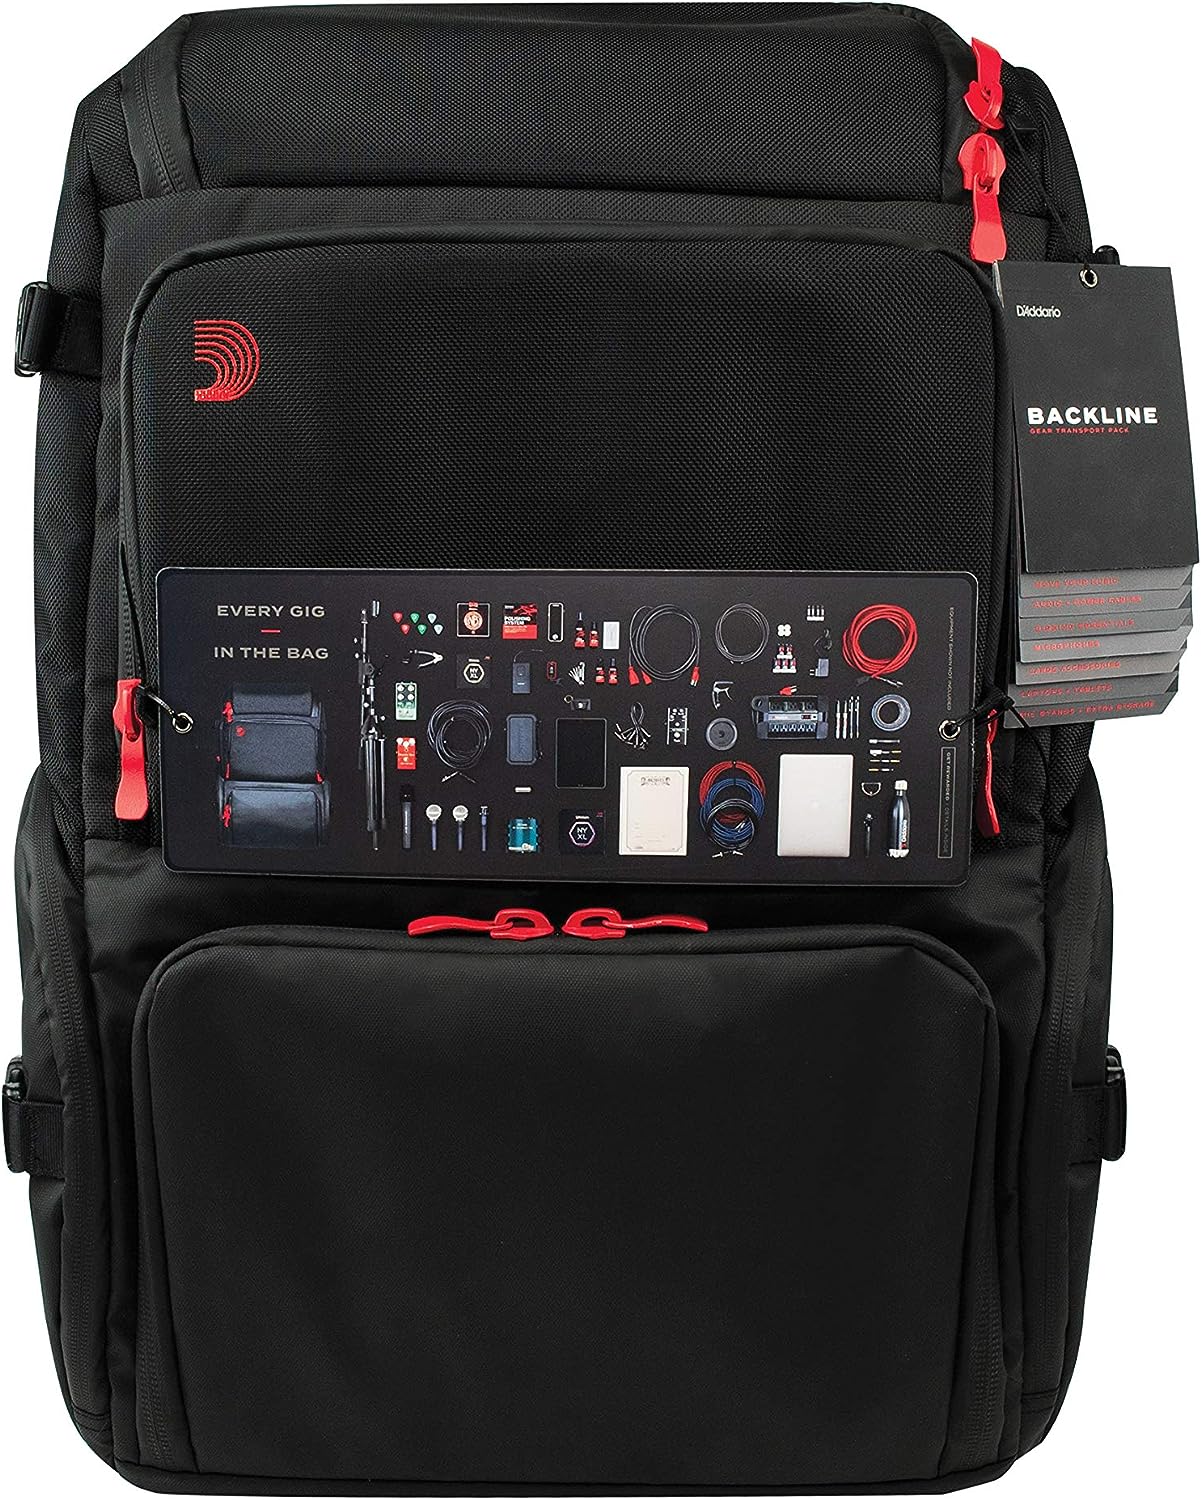 A look at D’Addario’s Backline Gear Transport Backpack